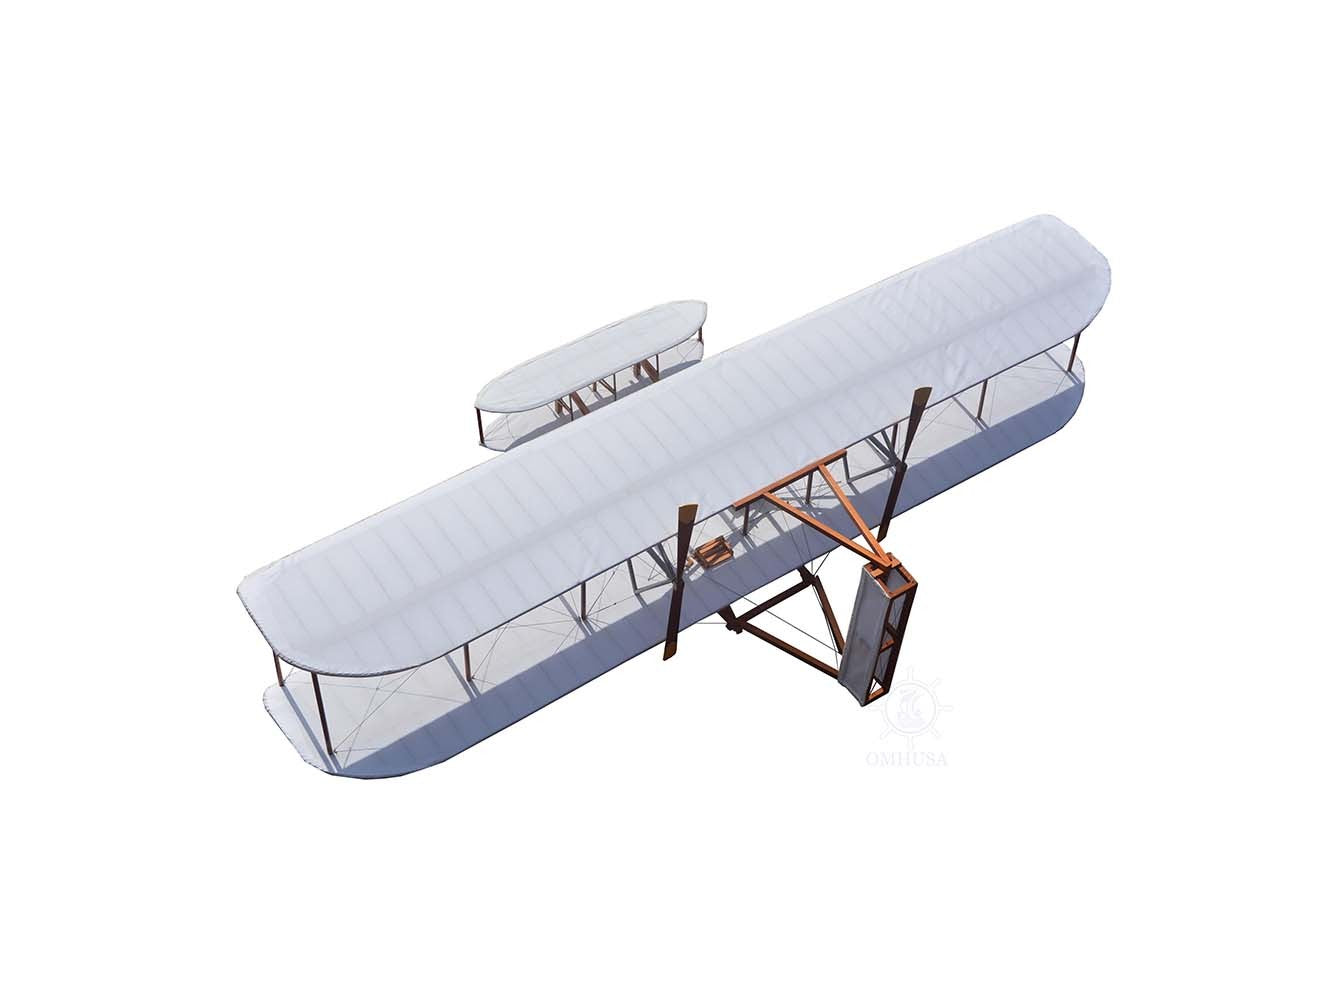 c1903 Wright Brothers Flyer Model Sculpture